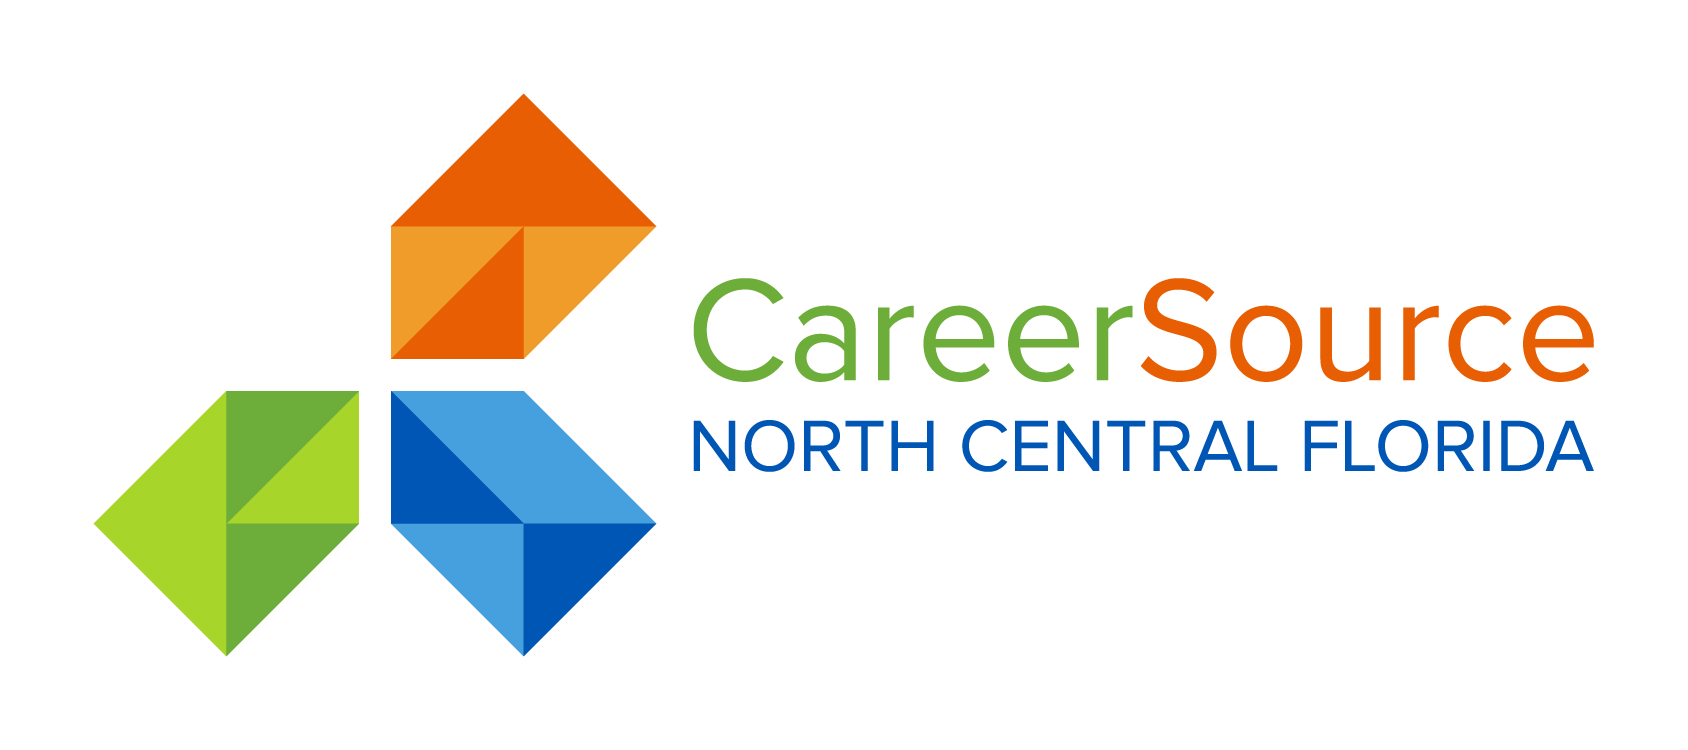 CareerSource North Central Florida logo